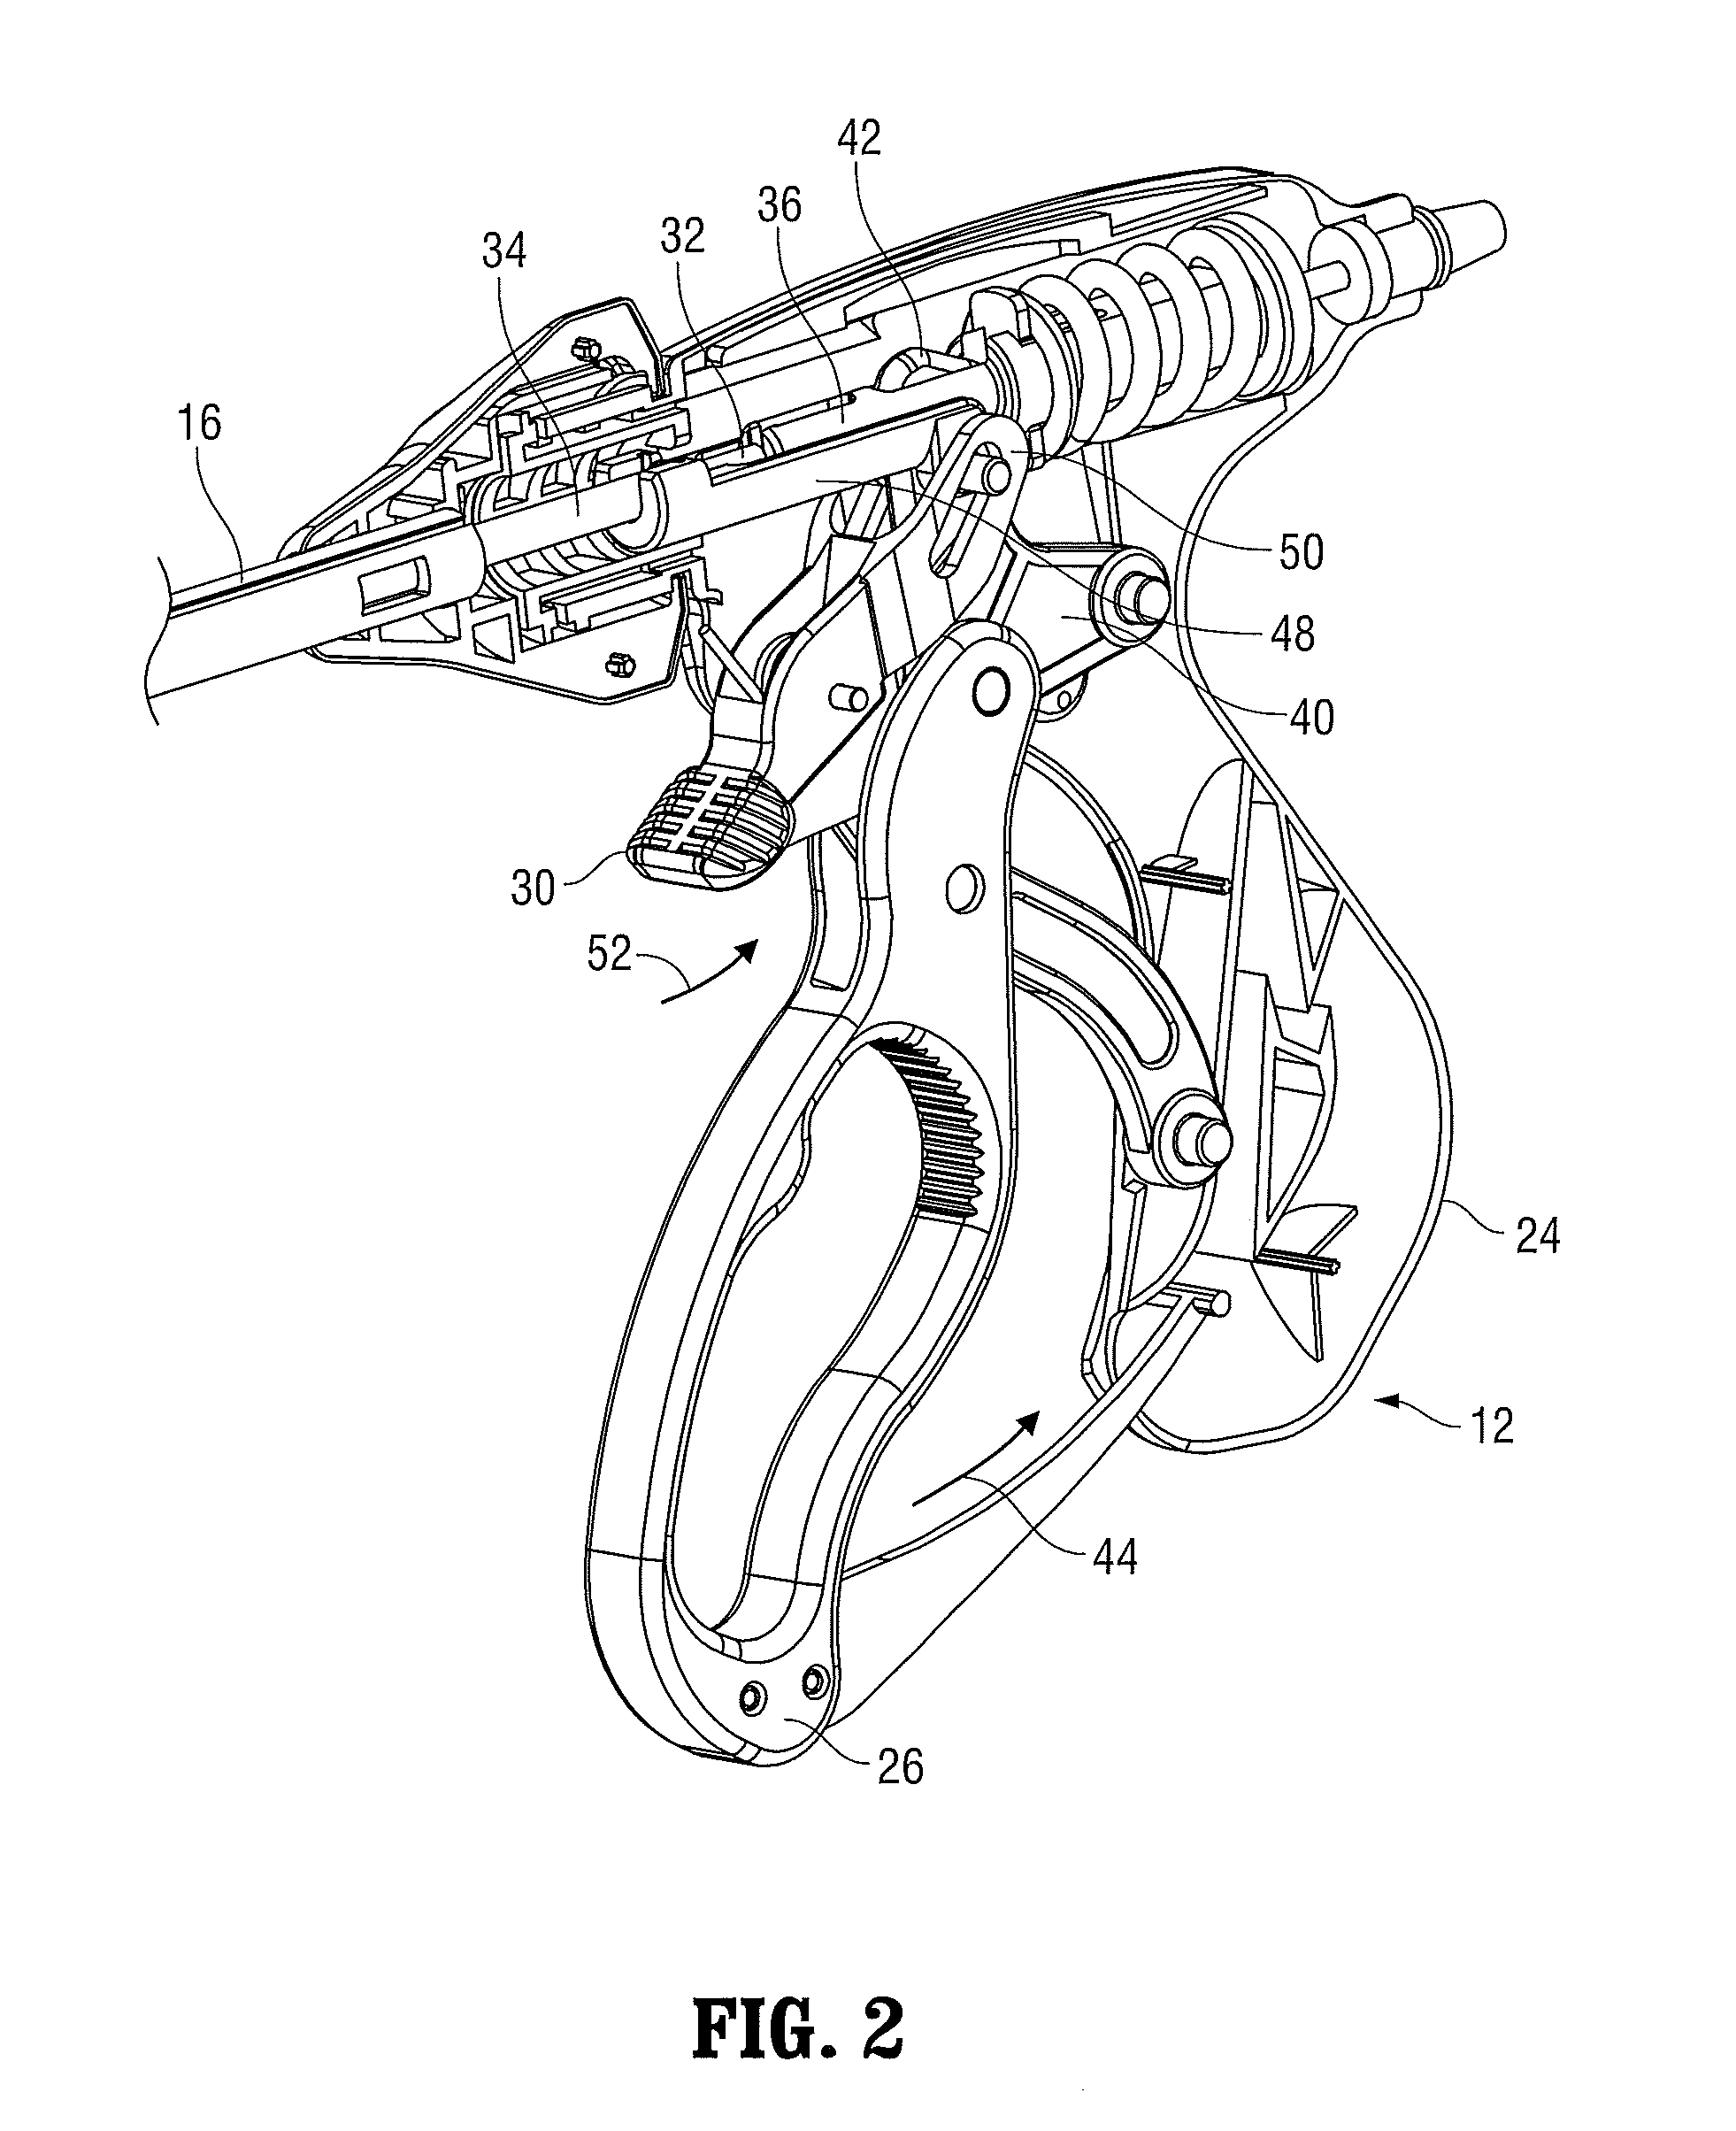 Modular Surgical Instrument with Contained Electrical or Mechanical Systems